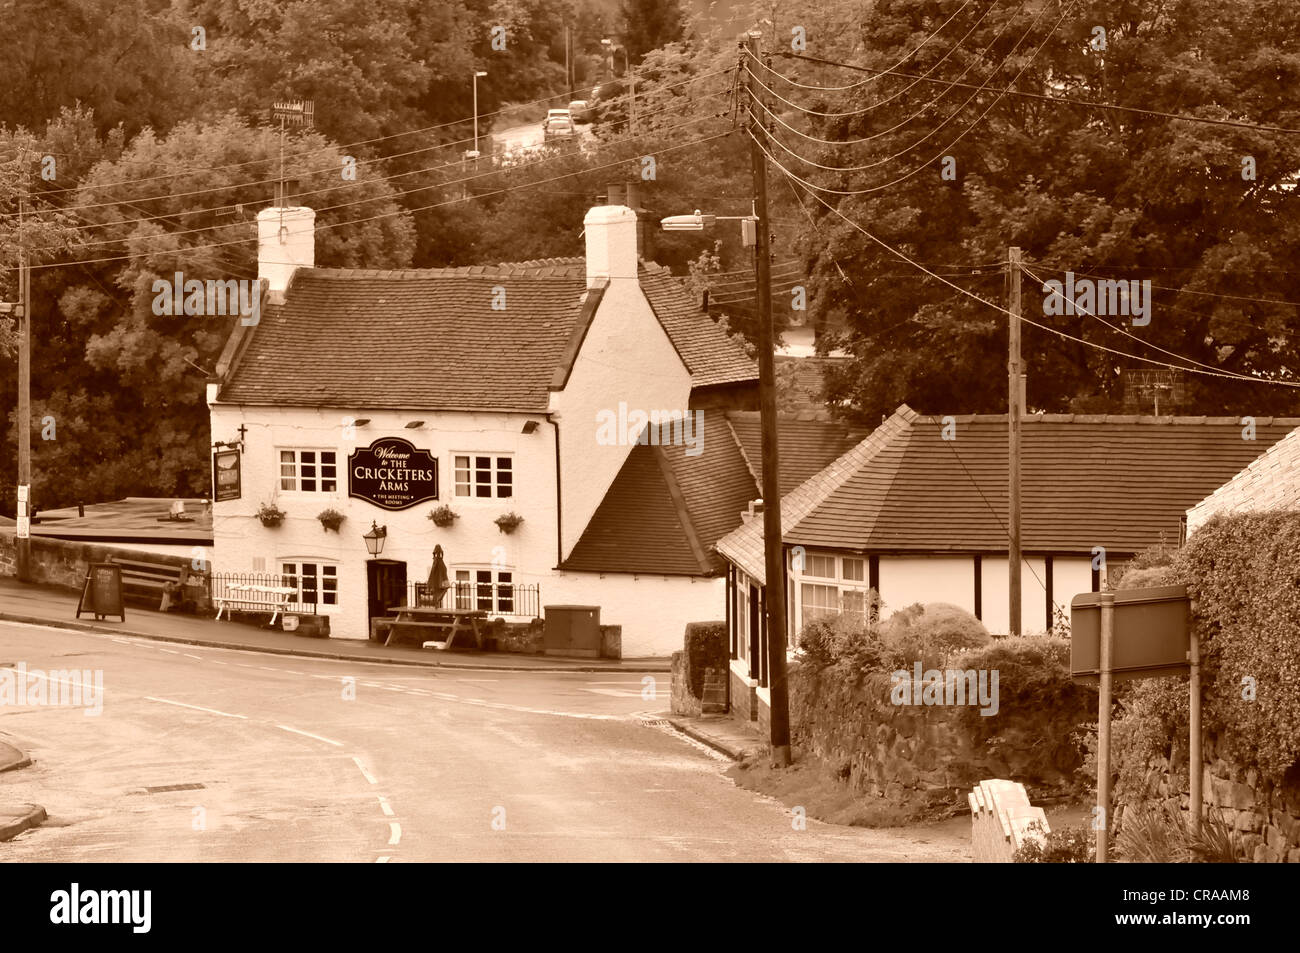 Le Cricketers Arms Oakamoor Banque D'Images